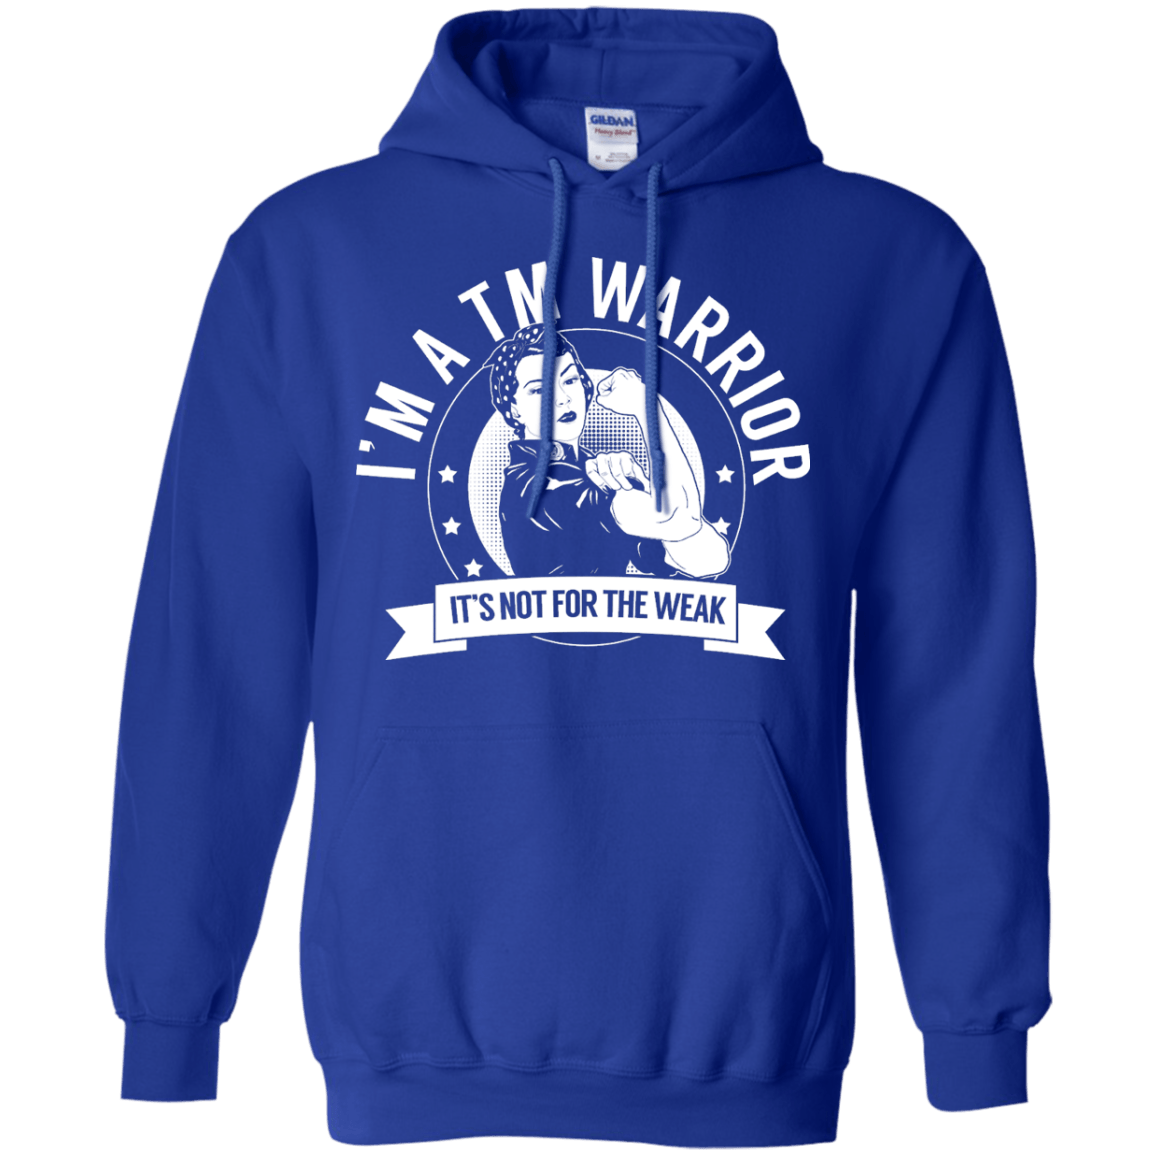 Transverse Myelitis - TM Warrior Not For The Weak Pullover Hoodie 8 oz - The Unchargeables